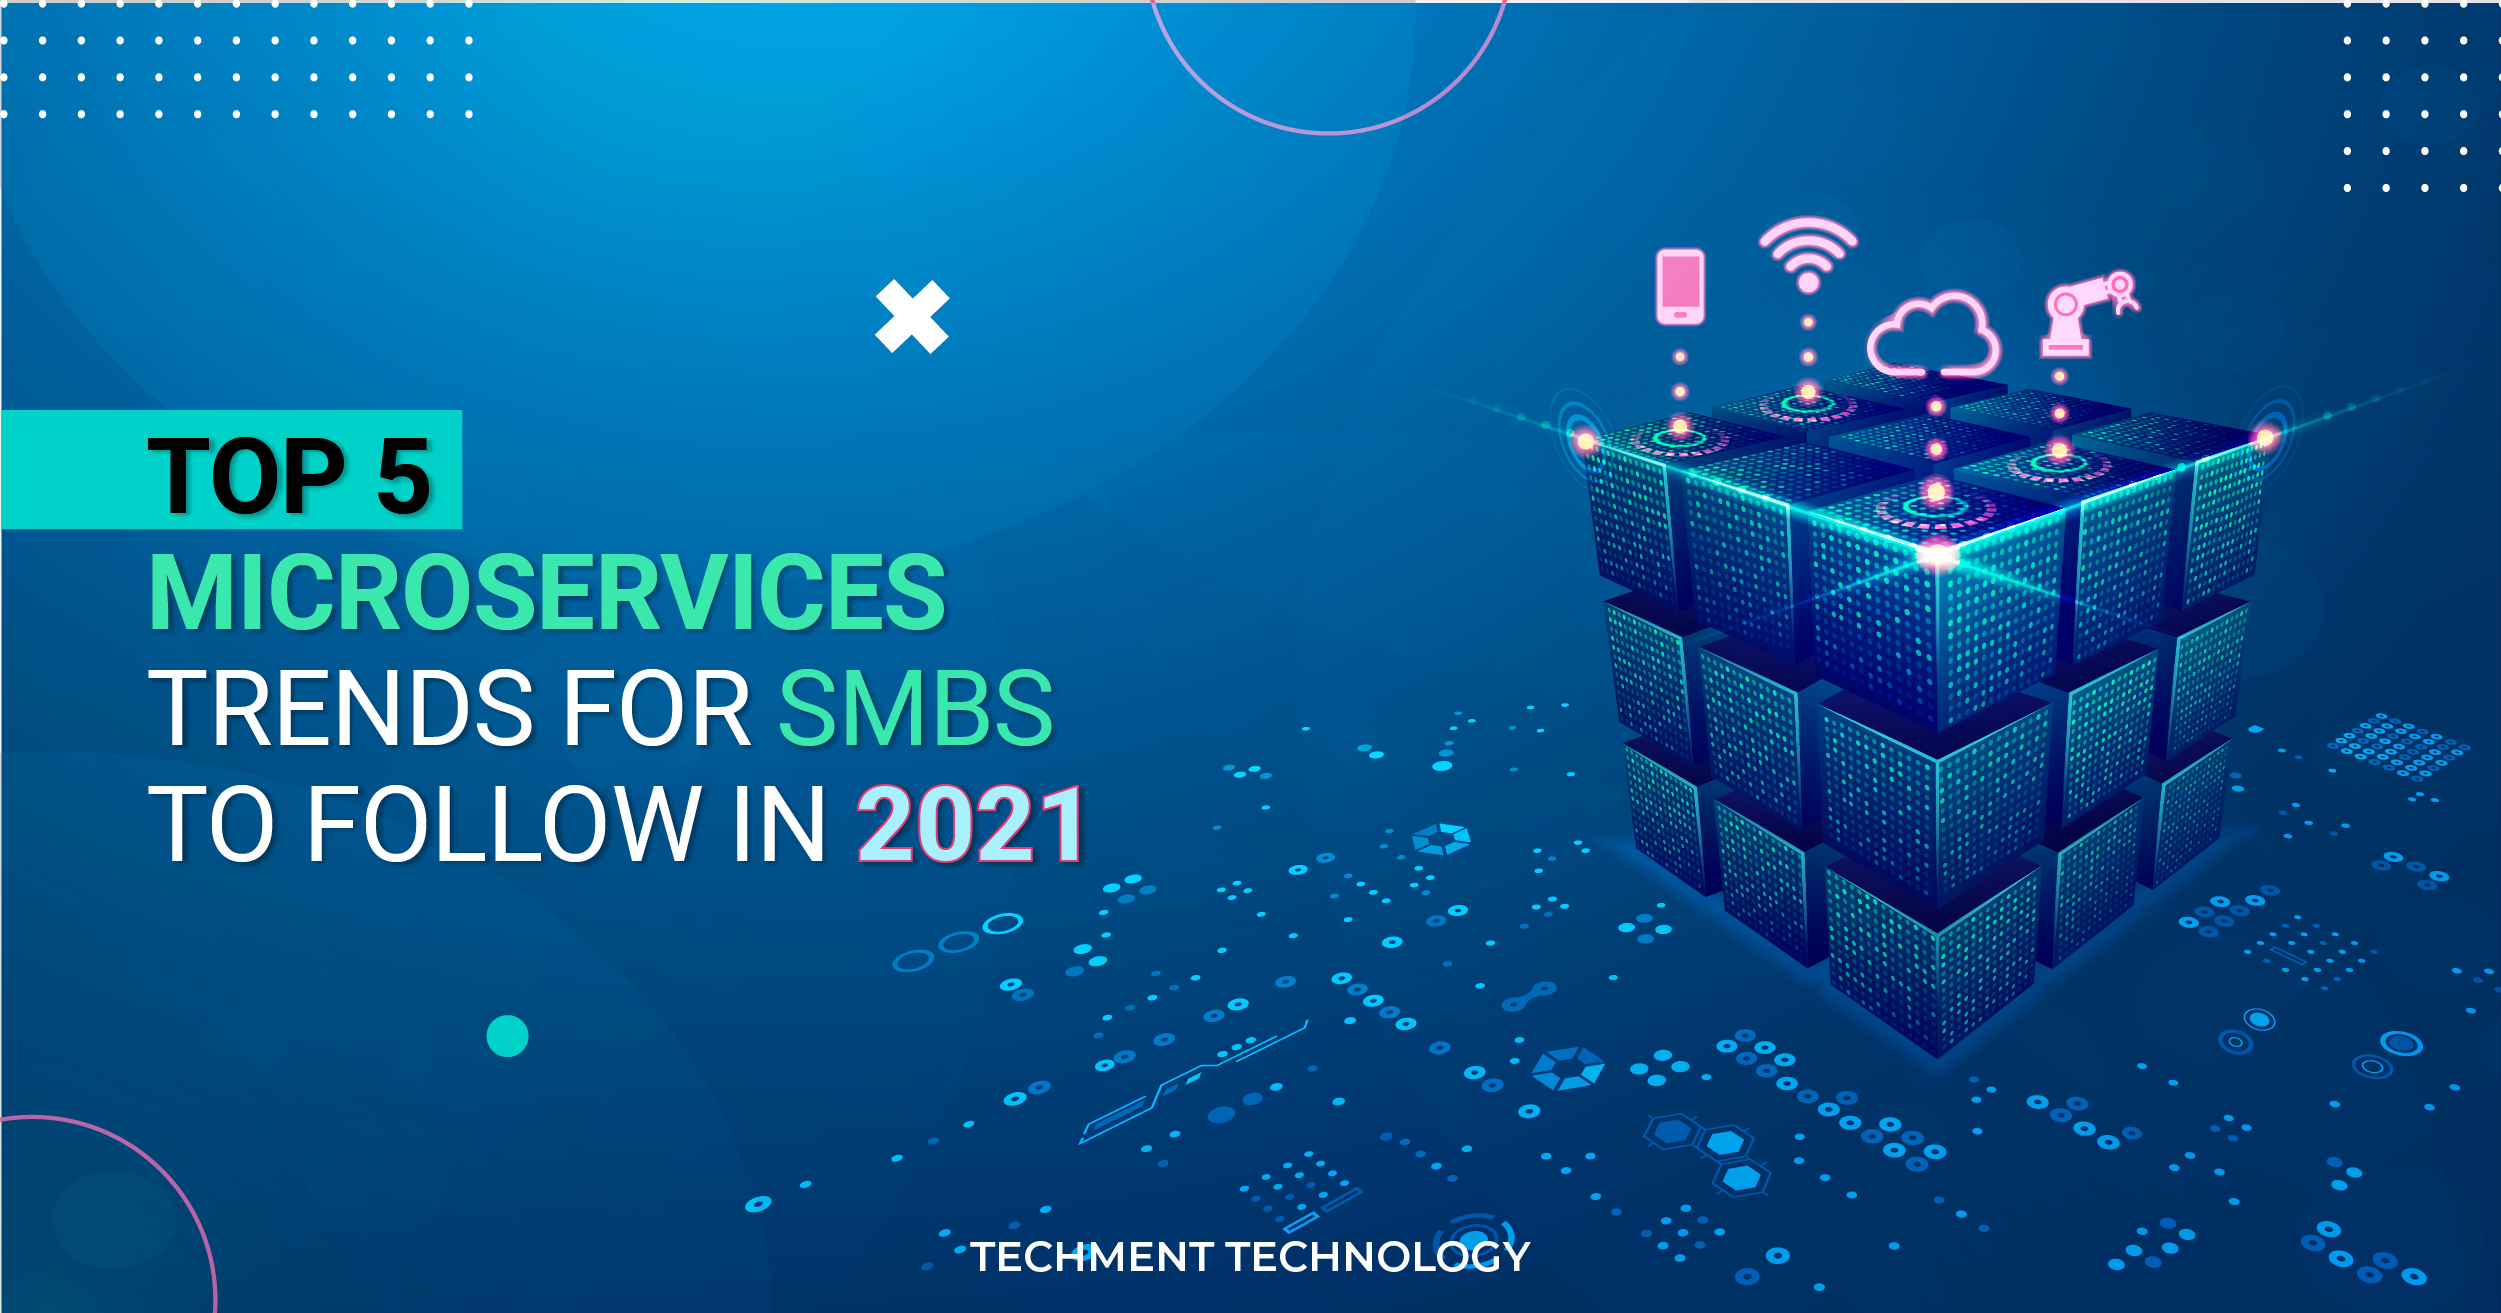 Top 5 Microservices Trends for SMBs to follow in 2021